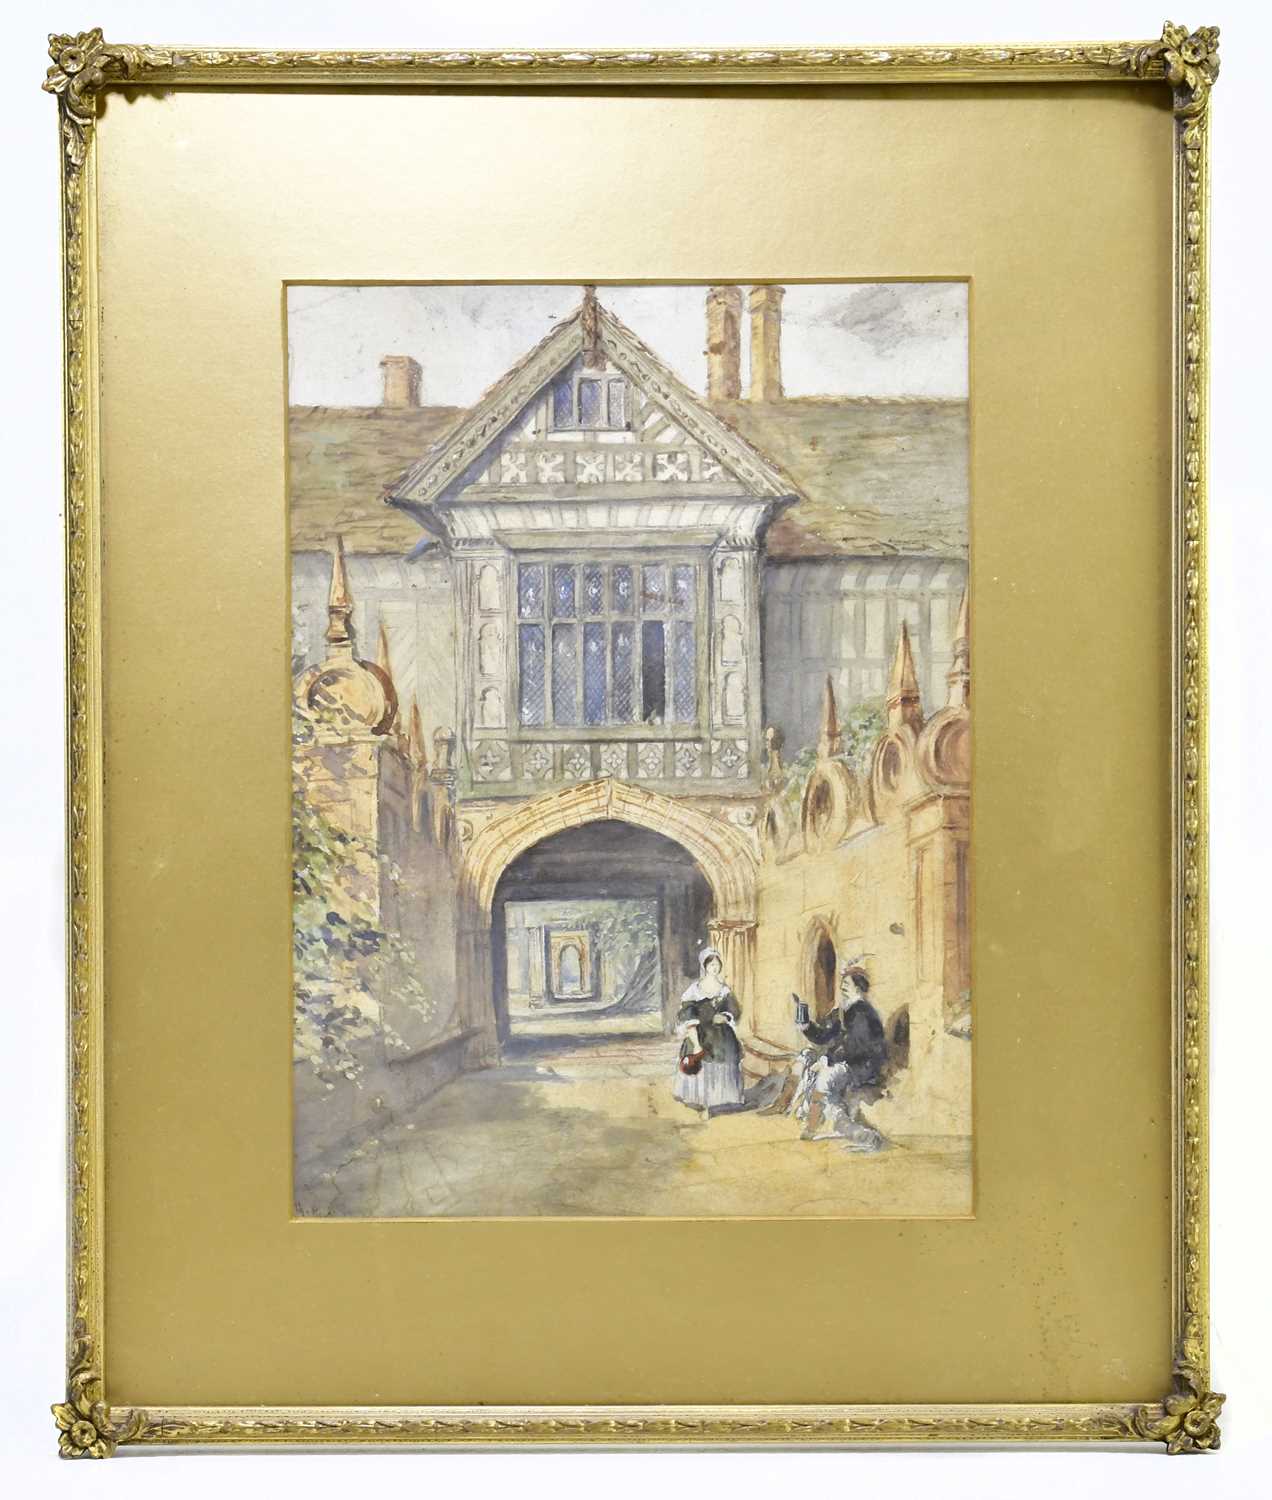 A watercolour, two people on a pathway by a timbered building, possibly Speke Hall, Liverpool,